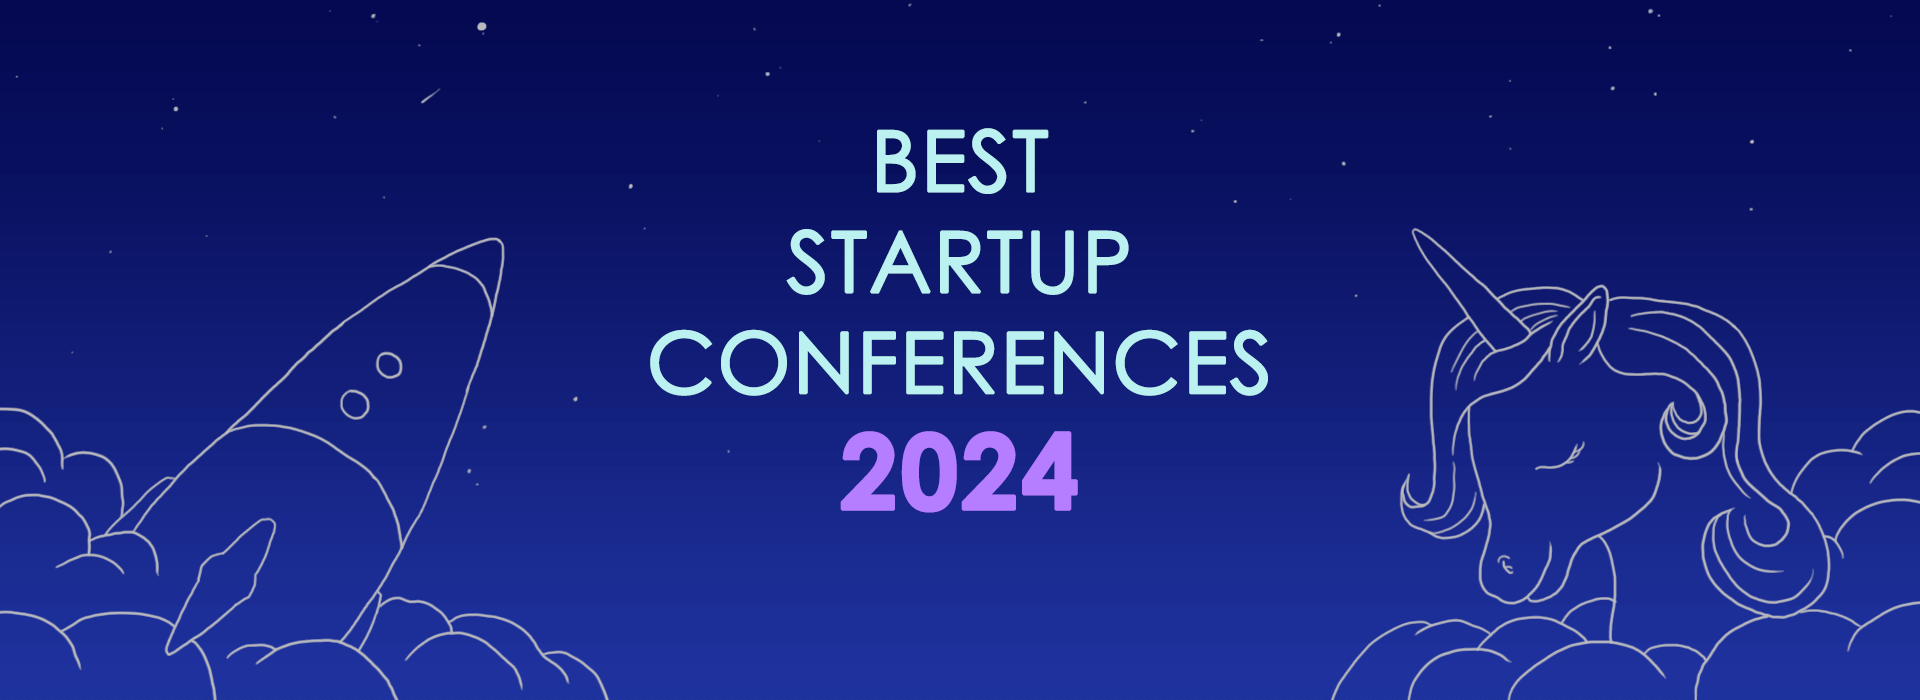 Best Startup Conferences and Events Worldwide 2024